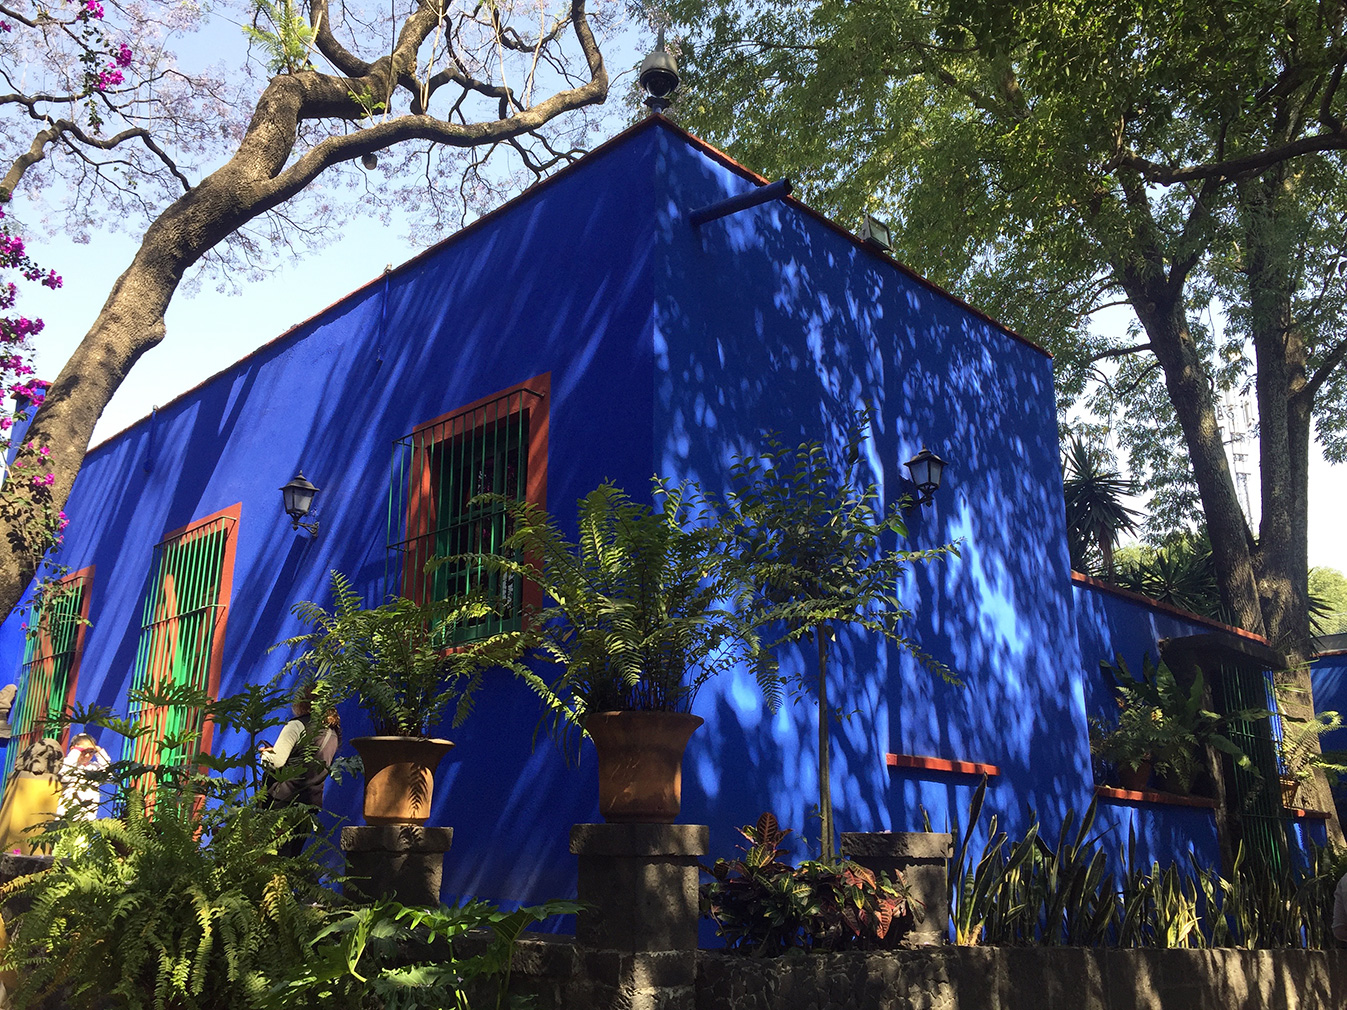 Explore the fascinating house museums of Mexico City: Frida Kahlo's blue house